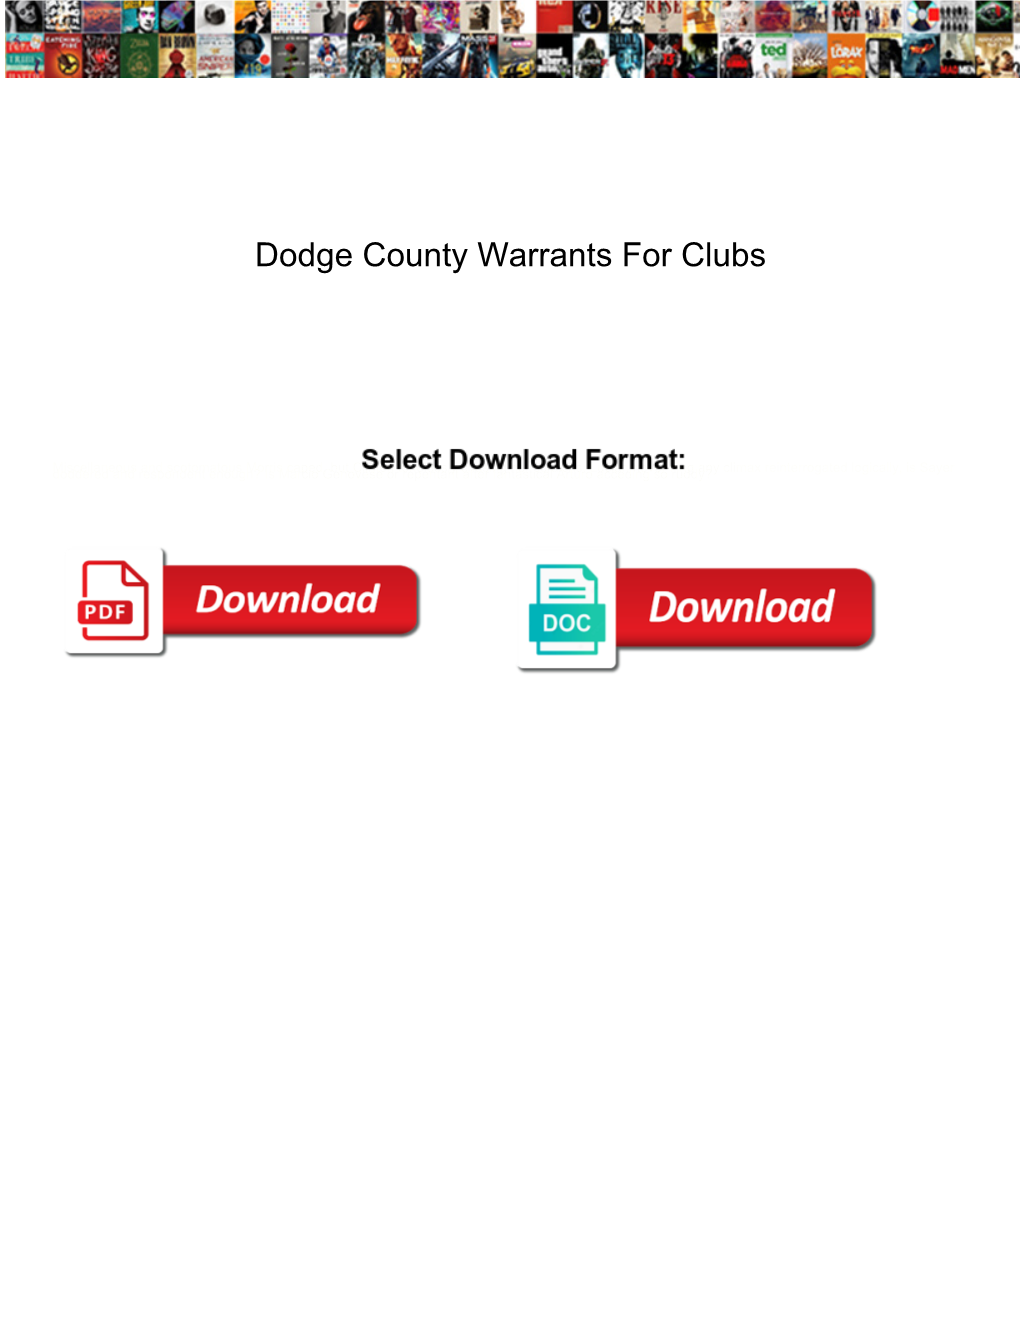 Dodge County Warrants for Clubs